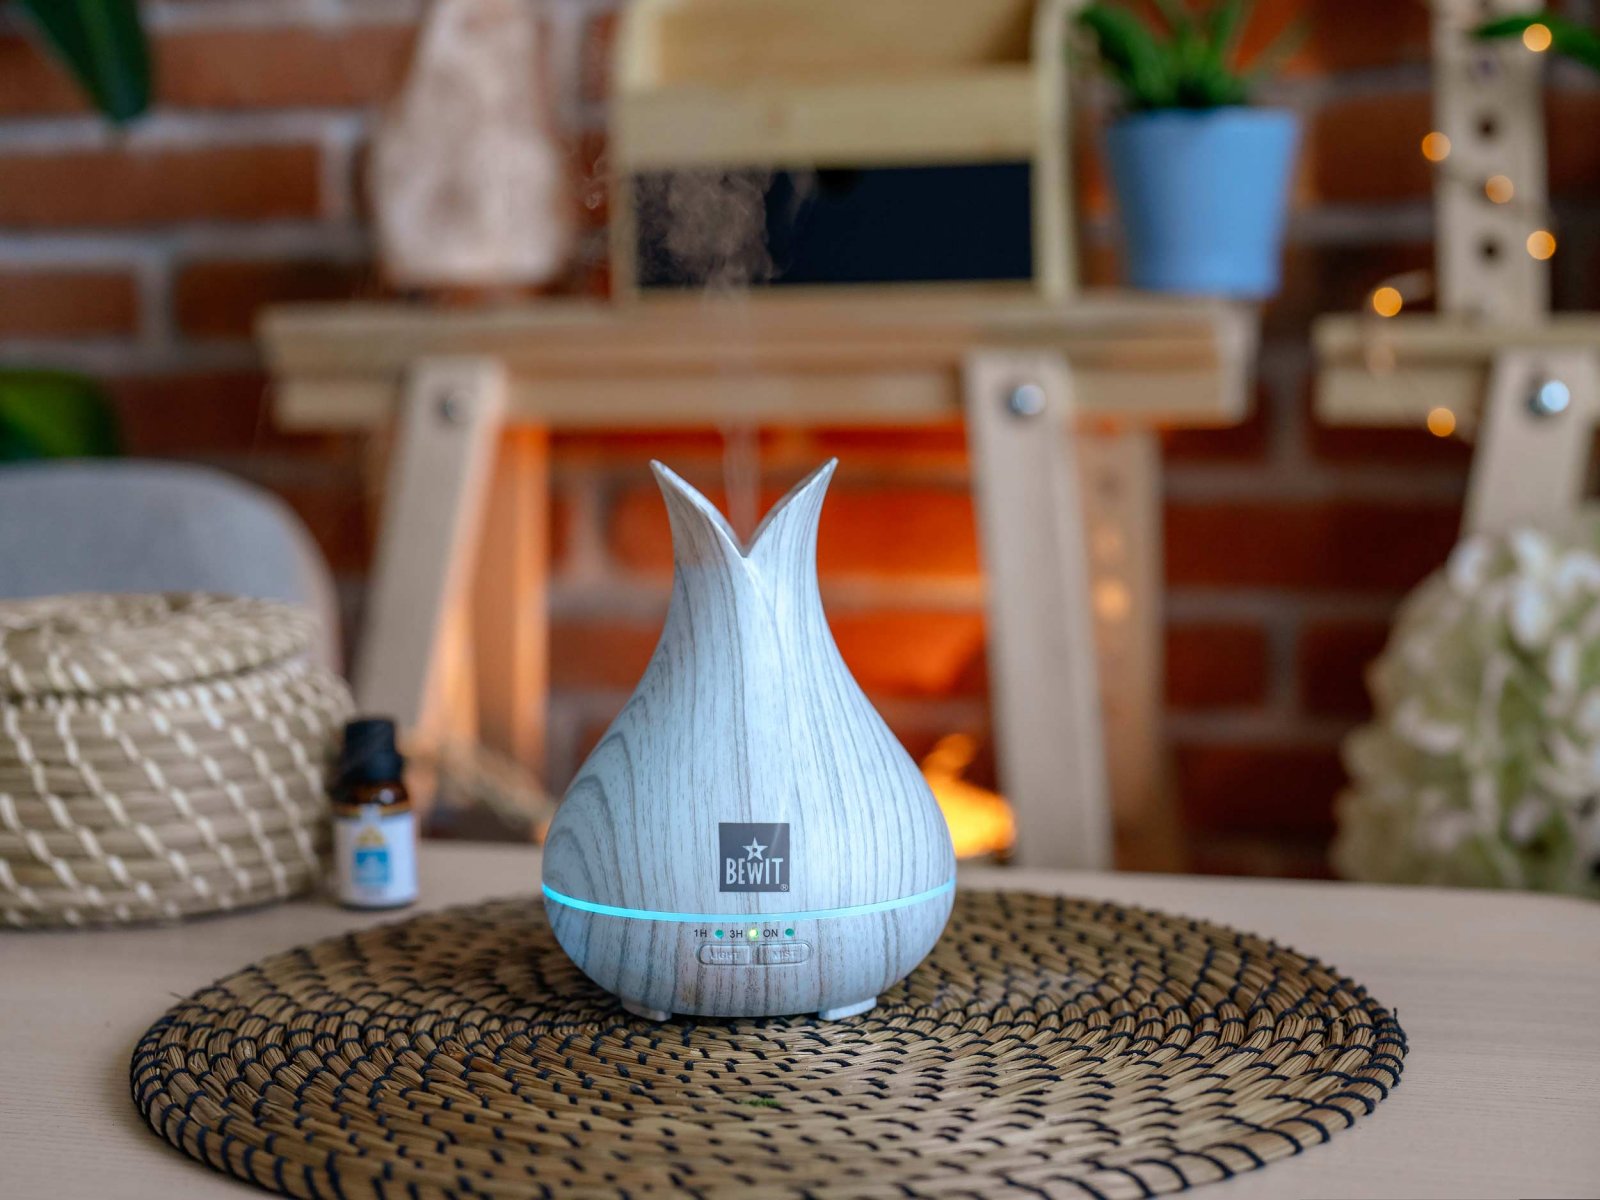 BEWIT Aroma diffuser CARAFE 150, white wood - Ultrasonic diffuser - 3